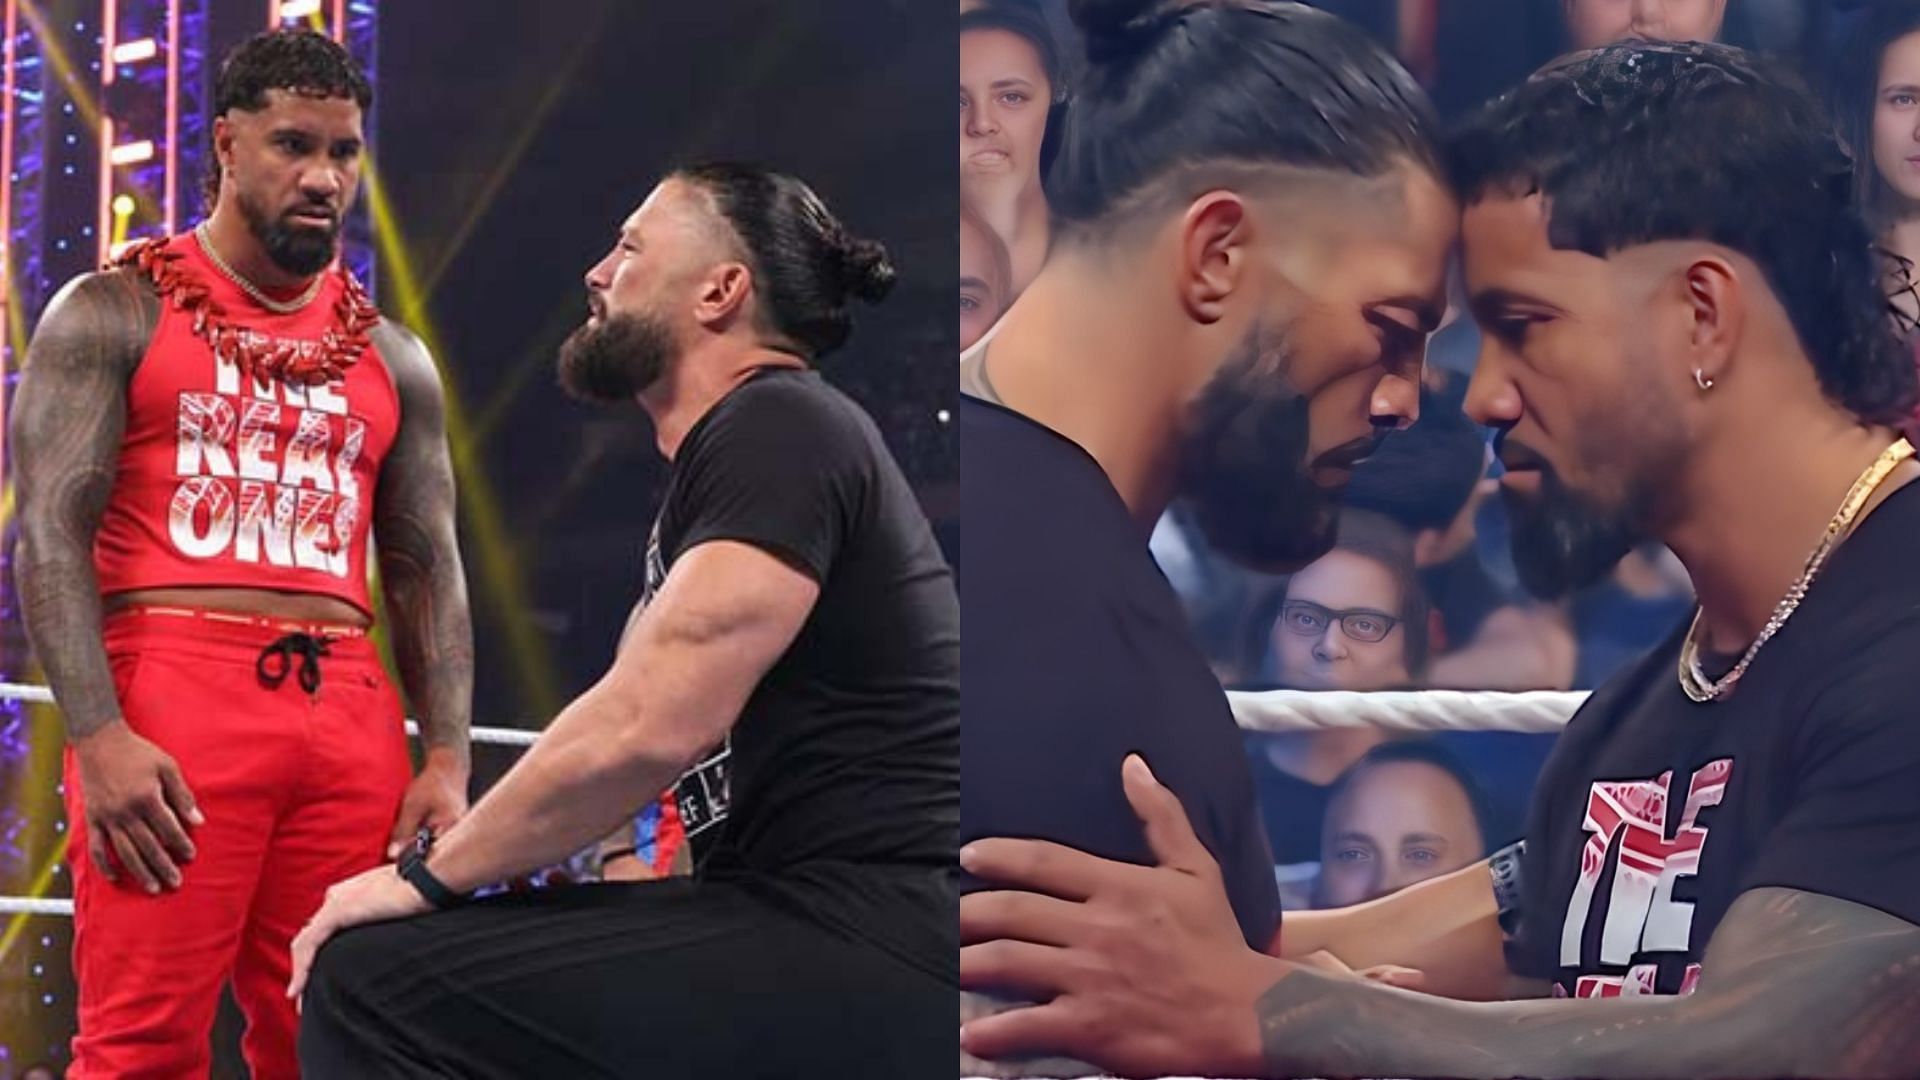 Jey Uso and Roman Reigns will collide at SummerSlam